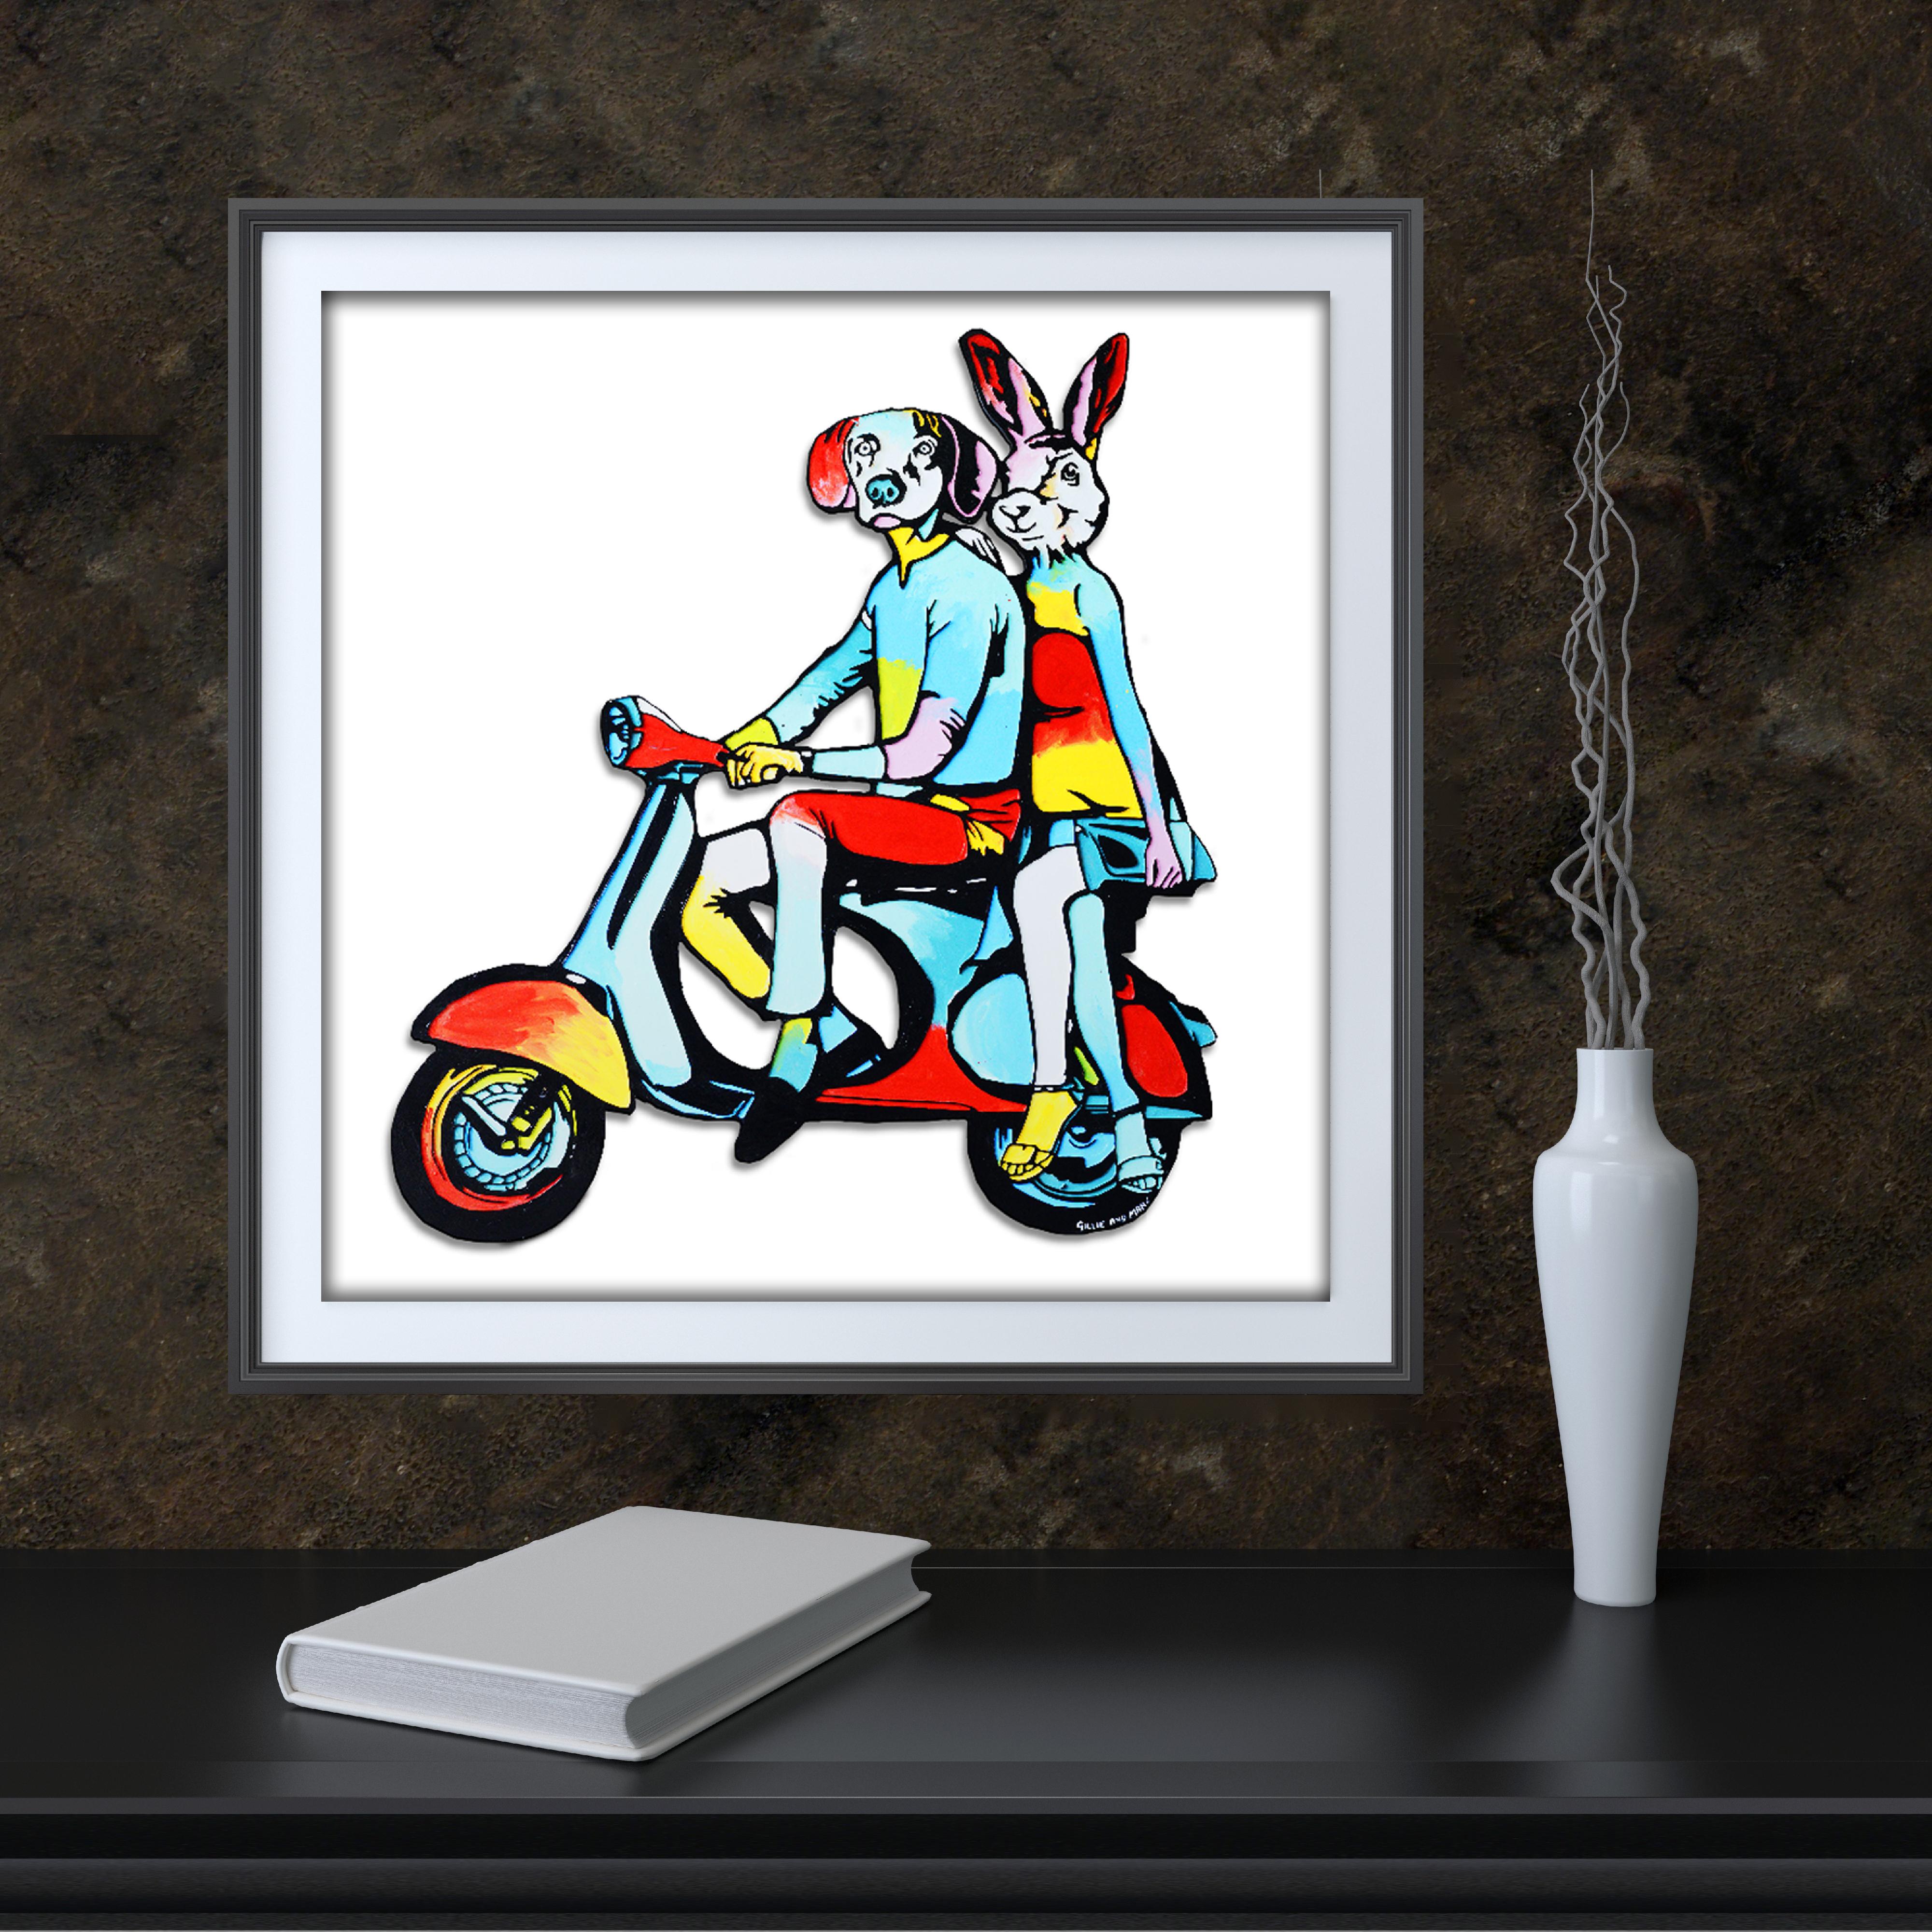 Pop Art - Animal Print - Gillie and Marc - Limited Edition - Vespa riding - Blue Figurative Print by Gillie and Marc Schattner